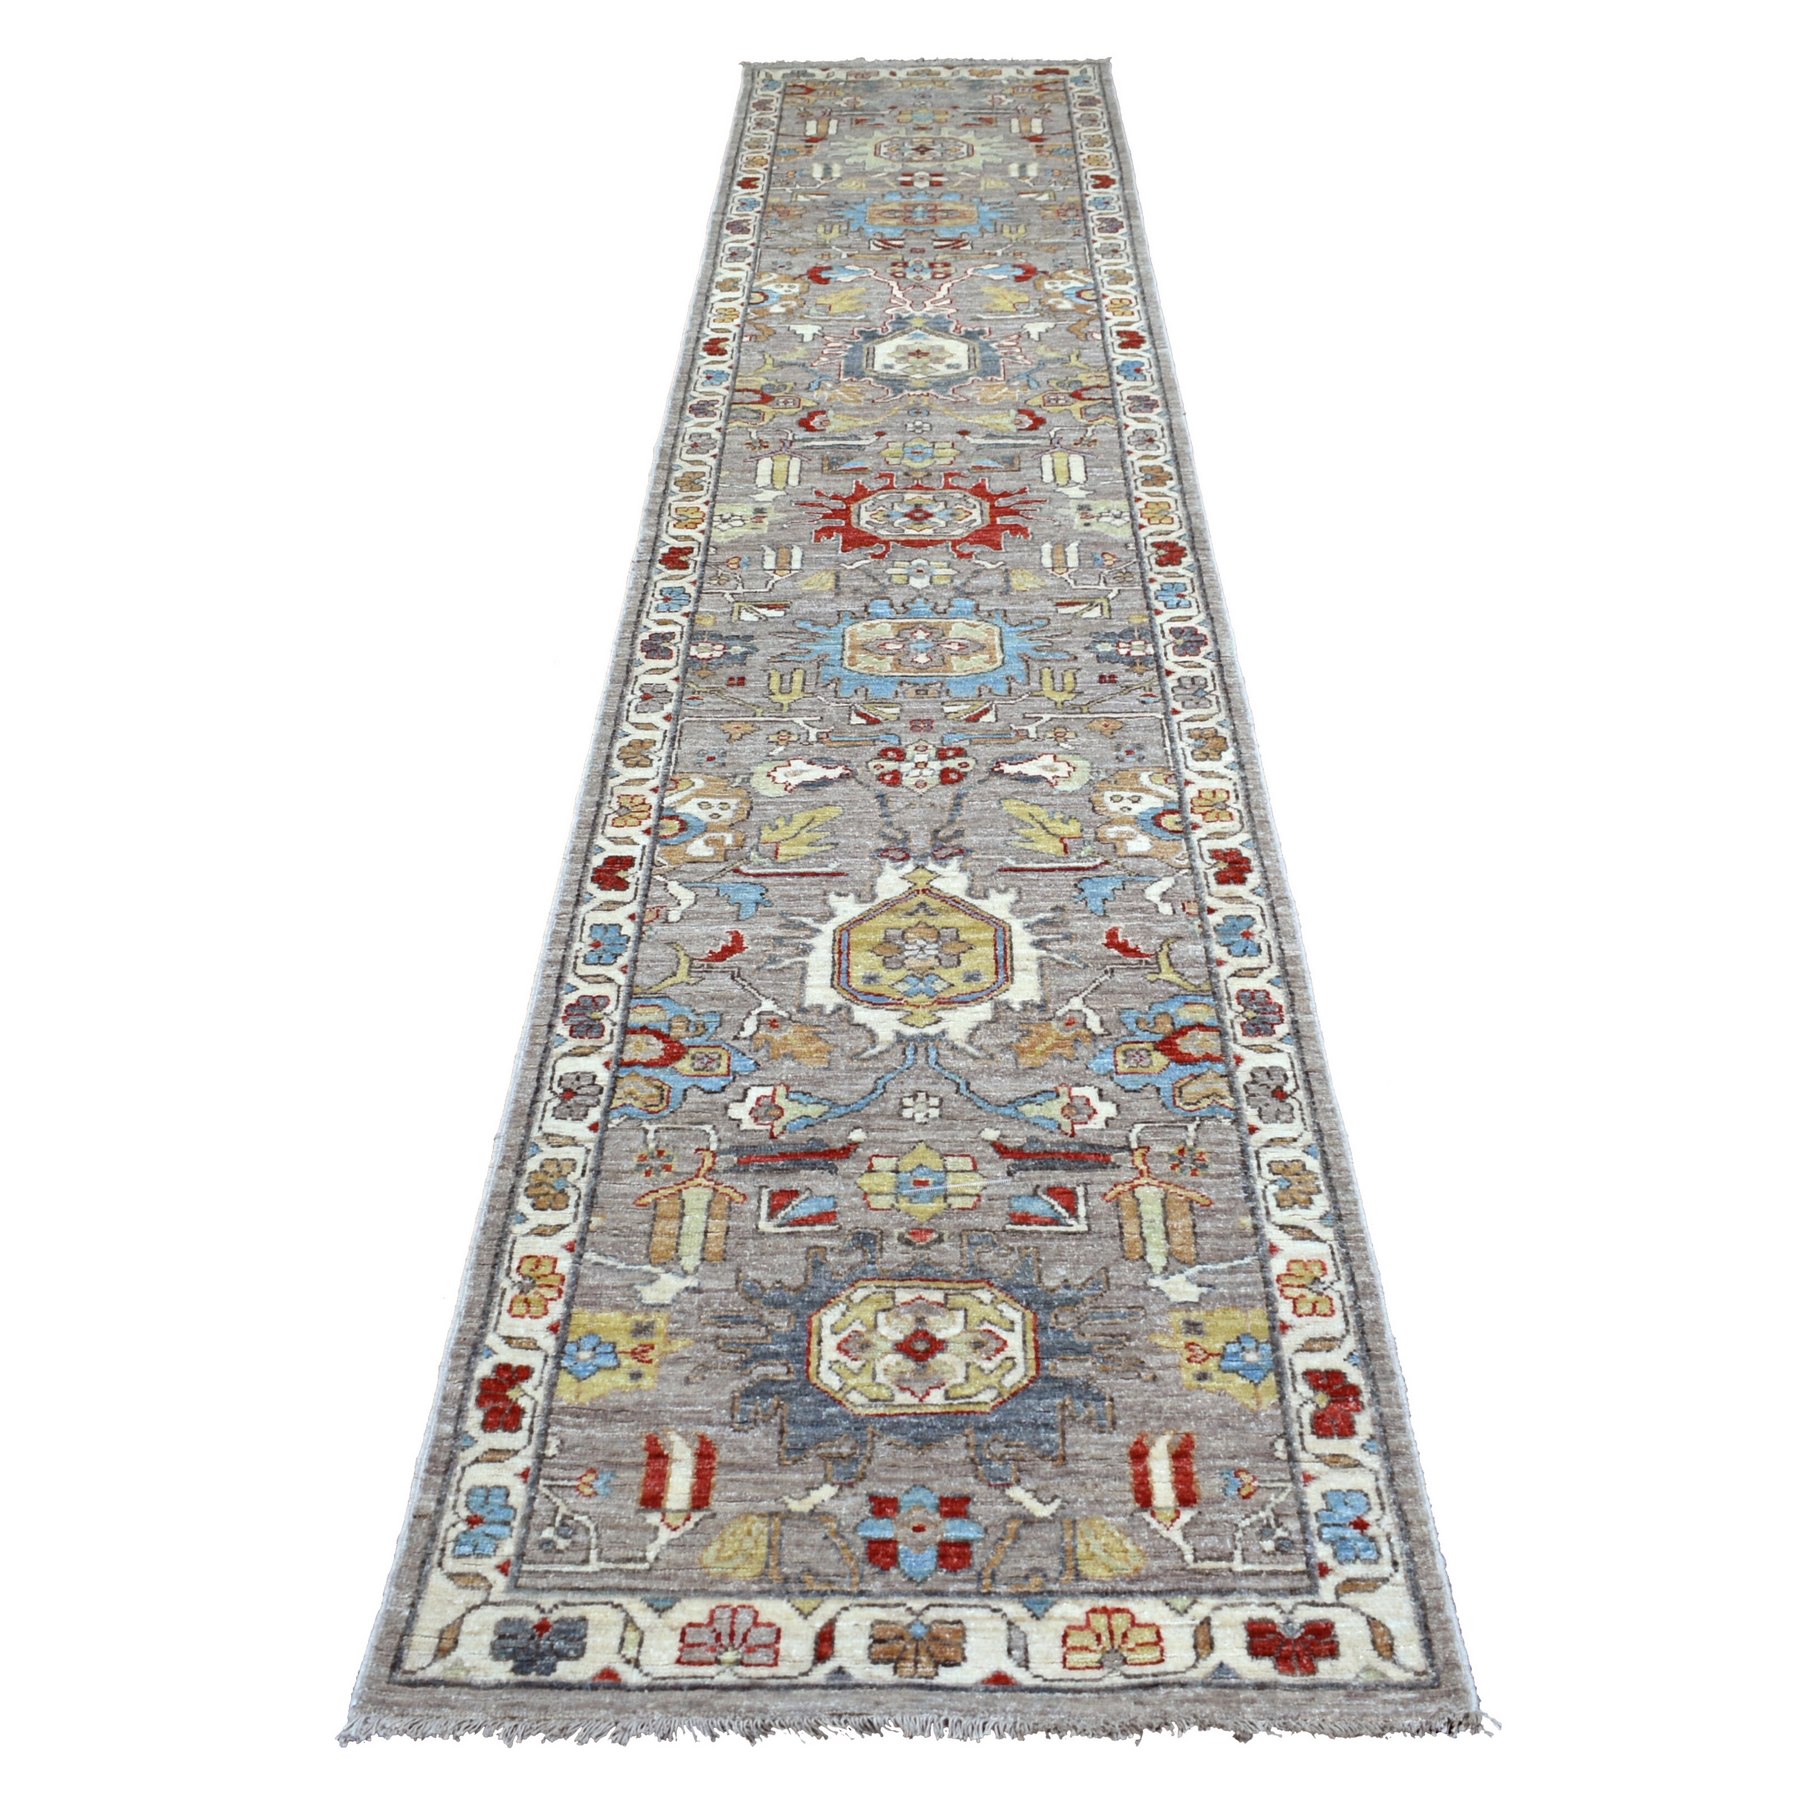 2'6"x11'9" Afghan Peshawar with Northwest Persian Design Soft and Pliable Wool Hand Woven Silver Gray Oriental Runner Rug 